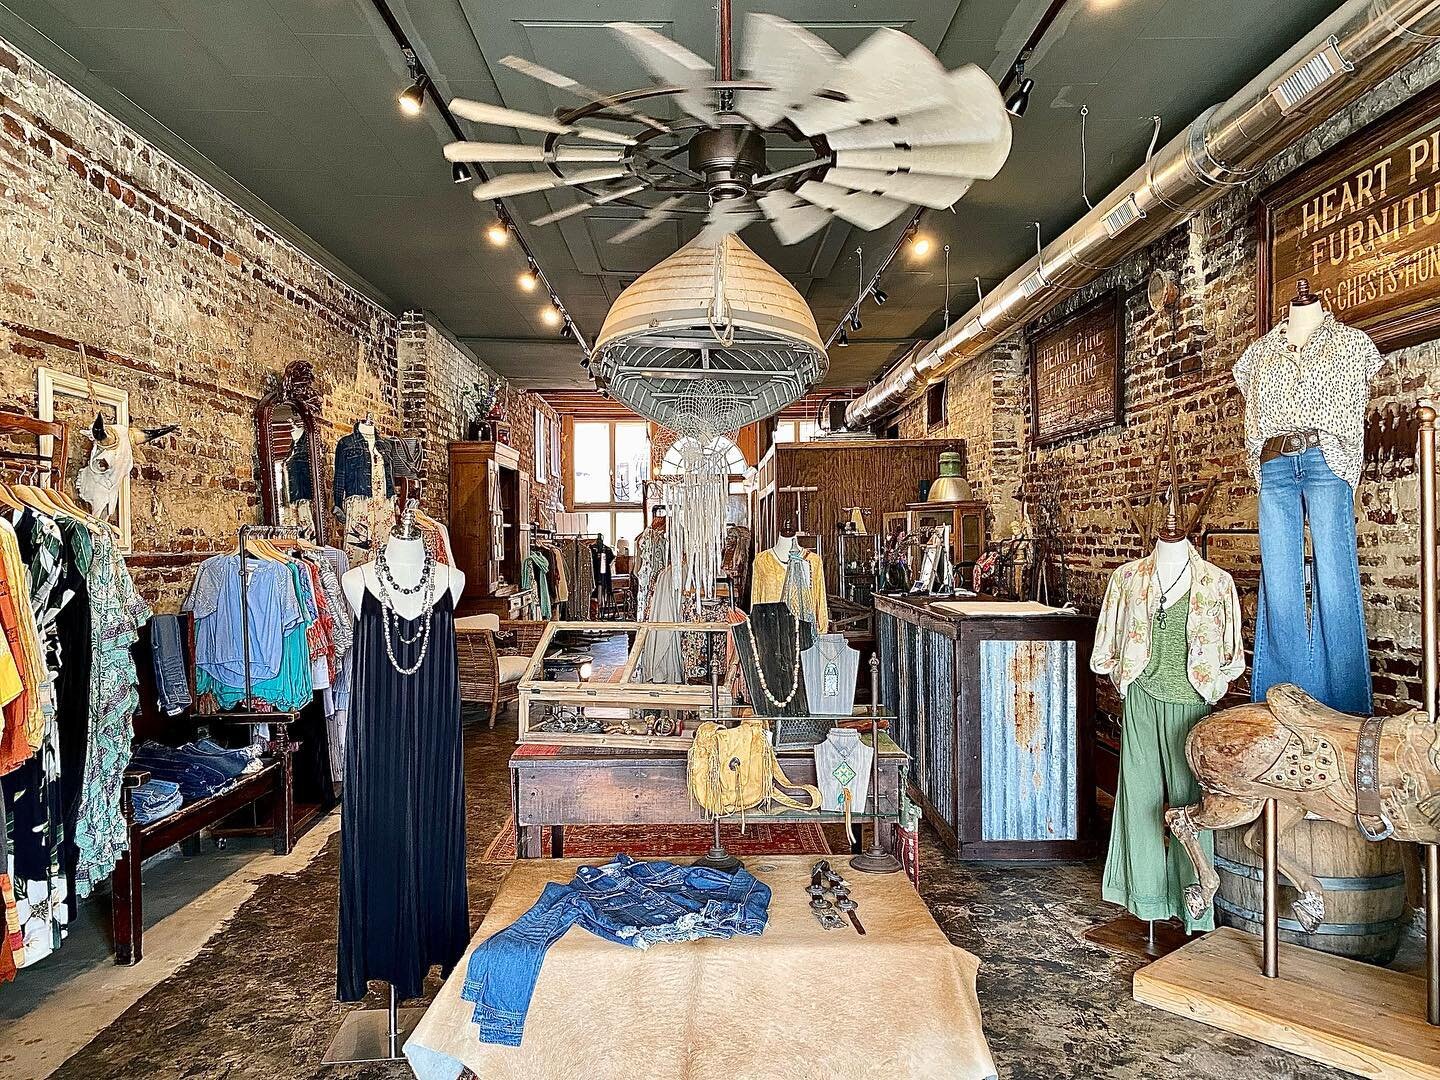 It's a beautiful day ☀️for a stroll &amp; visit with Lynda in our Georgetown shop or Elaine in our Mt Pleasant shop. 
.
New spring 🌼 goods have arrived!
.
Open today till 6pm
.
Shop either of our 2 locations: Georgetown, SC or Mt Pleasant, SC
.
#Wil